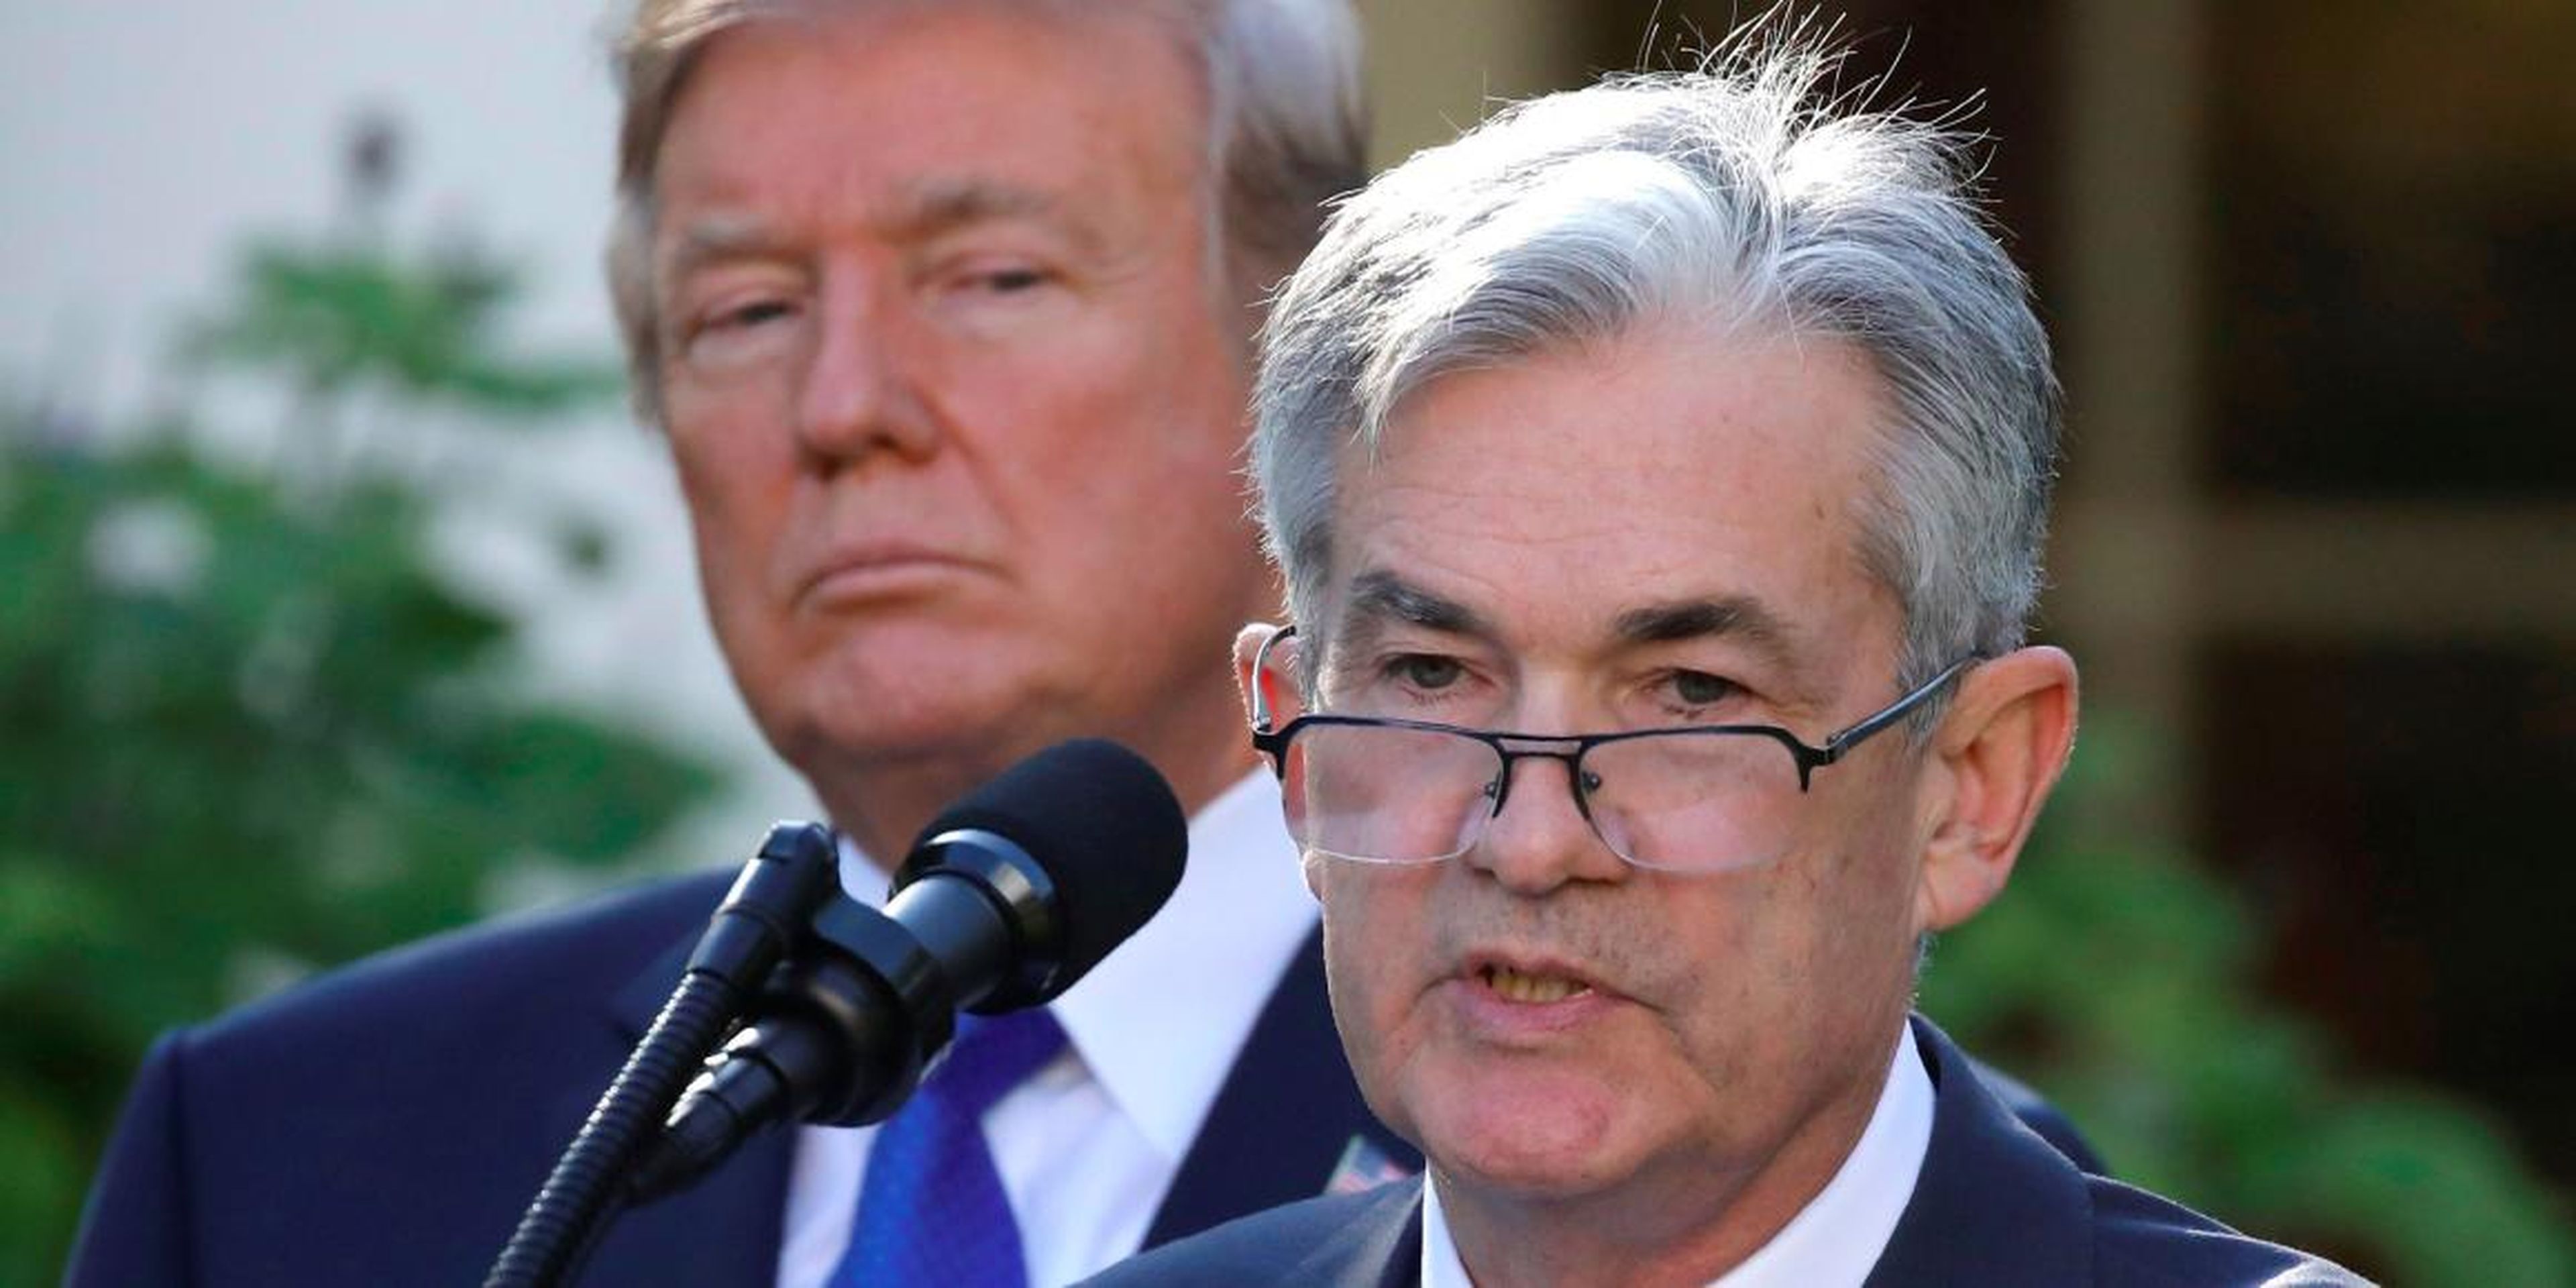 President Donald Trump stands behind Federal Reserve chairman Jerome Powell.